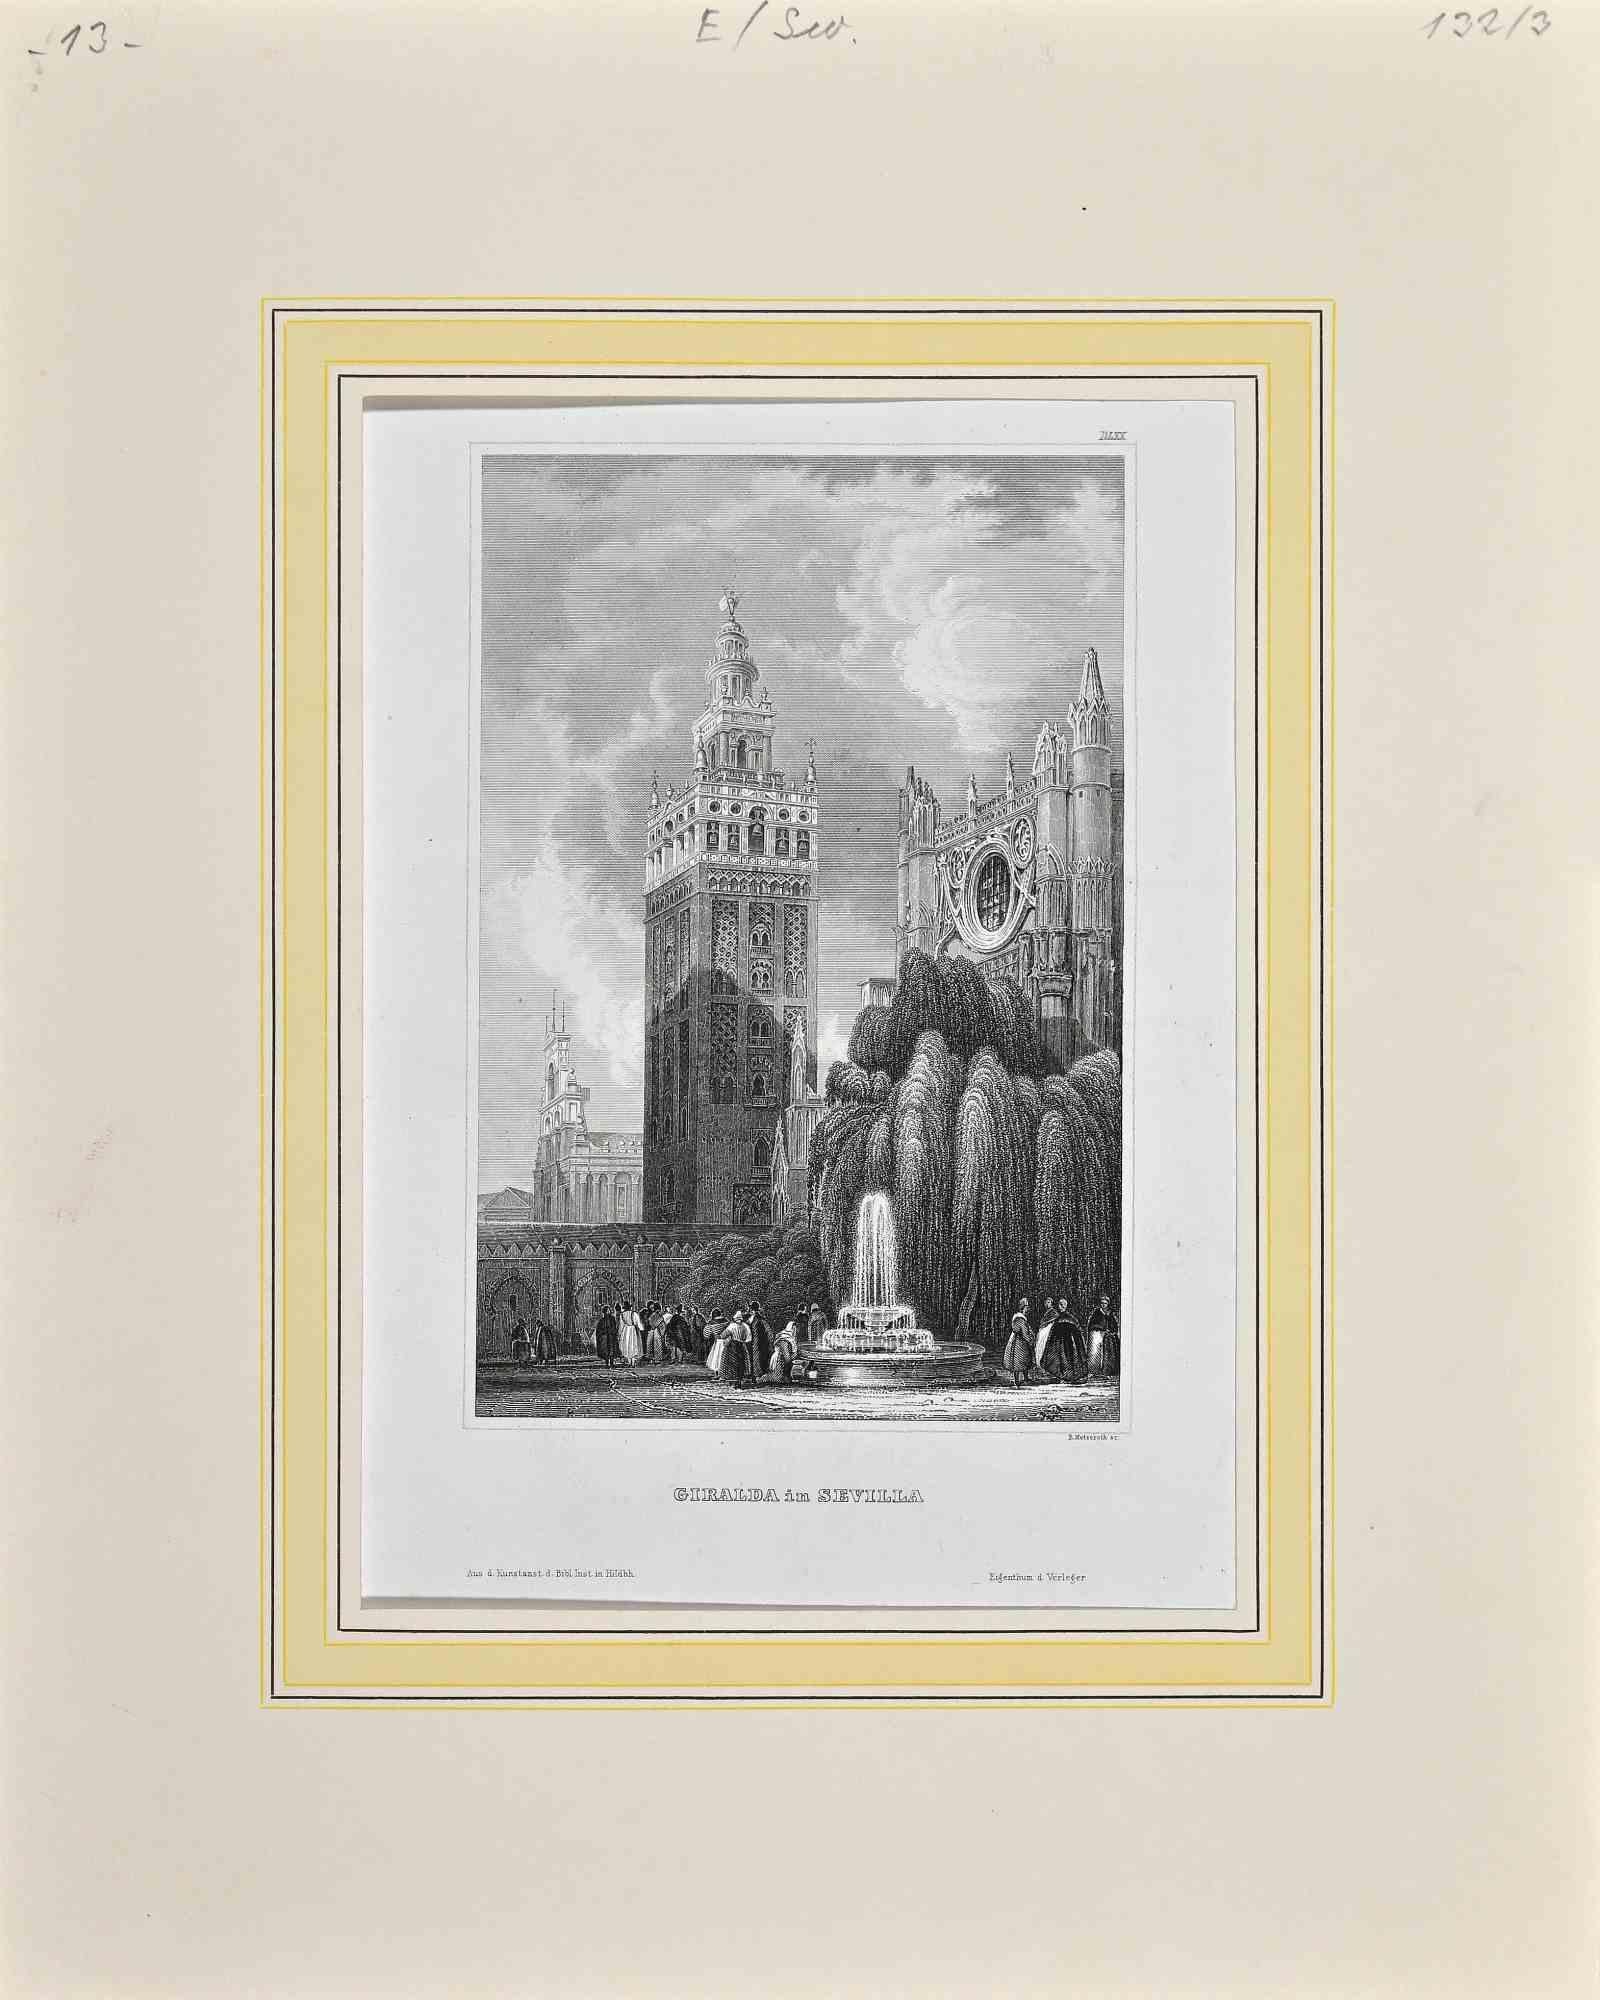 Giralda in Sevilla in Cordova is an original lithograph on paper realized by B. Metzeroth in The 19th Century.

Signed on the plate on the lower right corner.

Original lithograph on paper. 

Titled on the lower center.

Passepartout included (cm